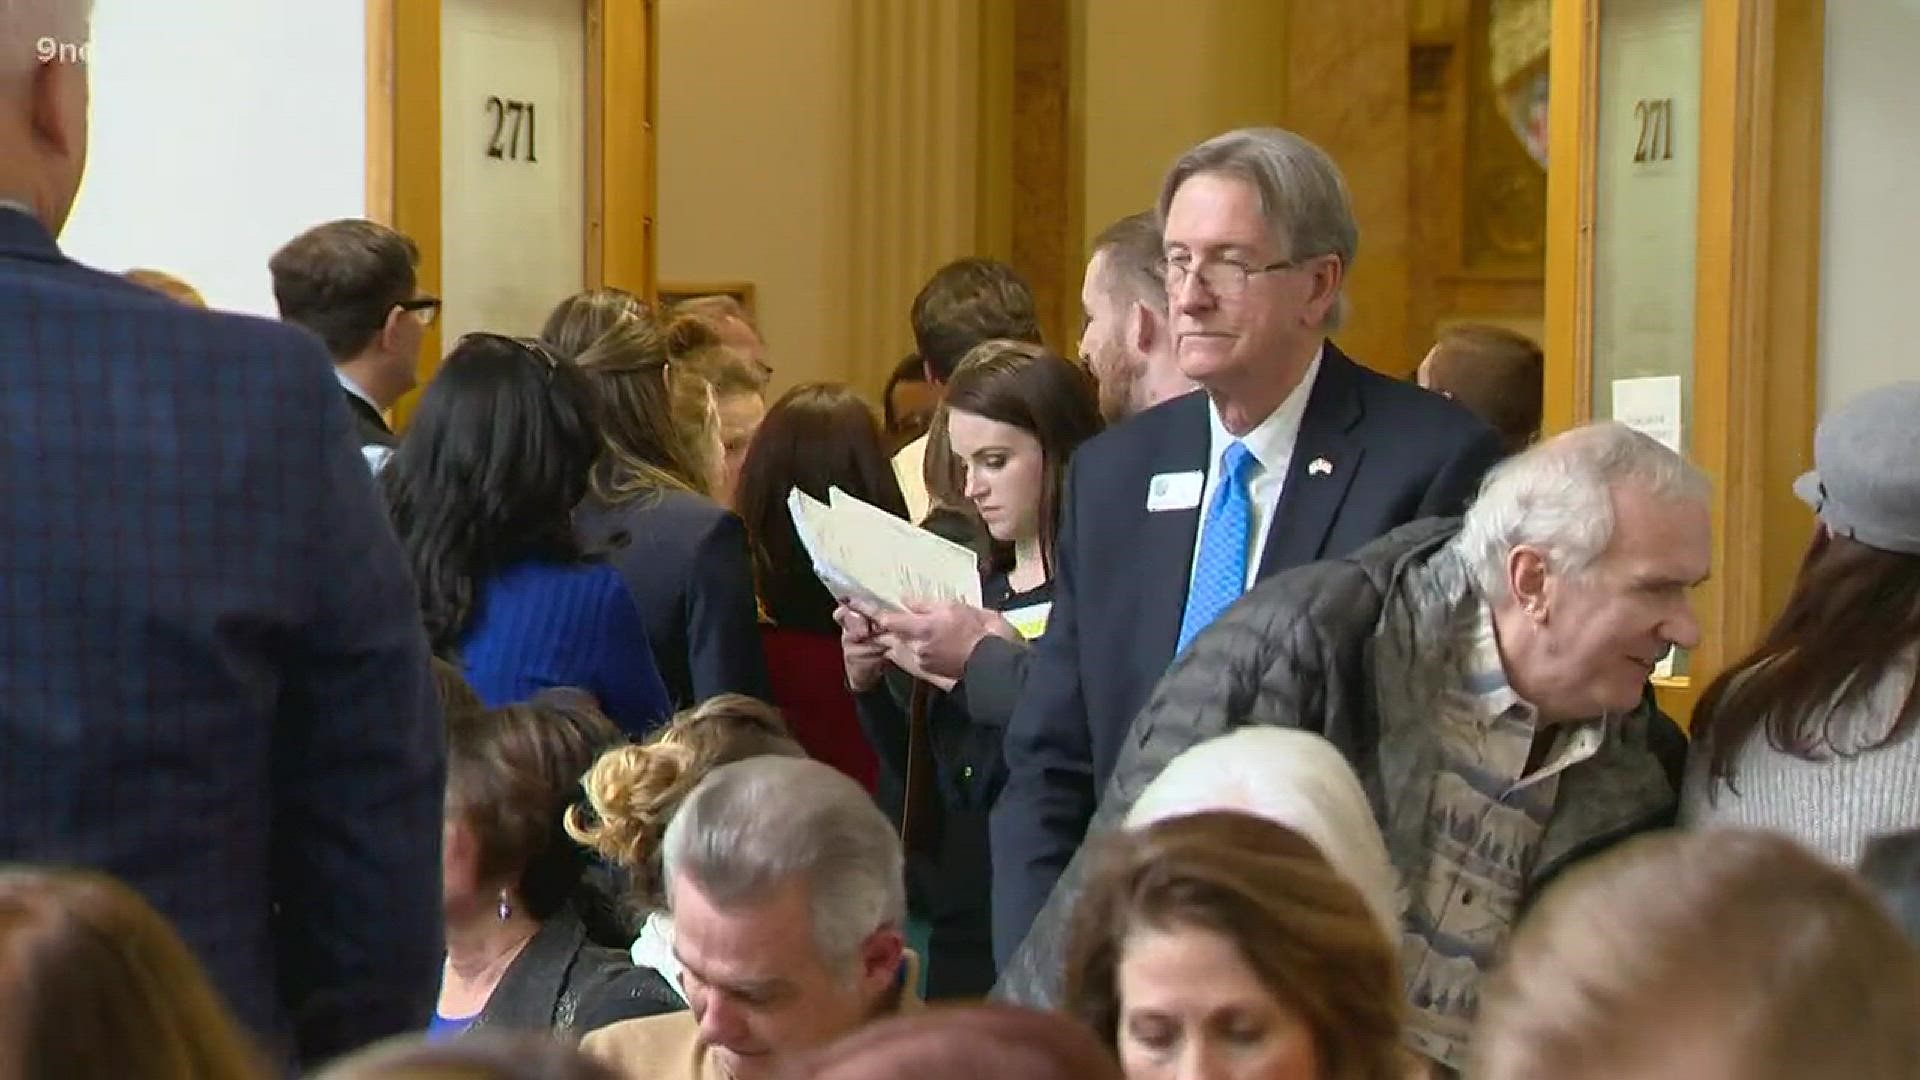 More than 300 people have signed up to speak at a hearing at the state capitol on proposed changes to sexual education in Colorado classrooms. A new bill would require school district that provide sex ed courses to teach a comprehensive curriculum, not just abstinence.